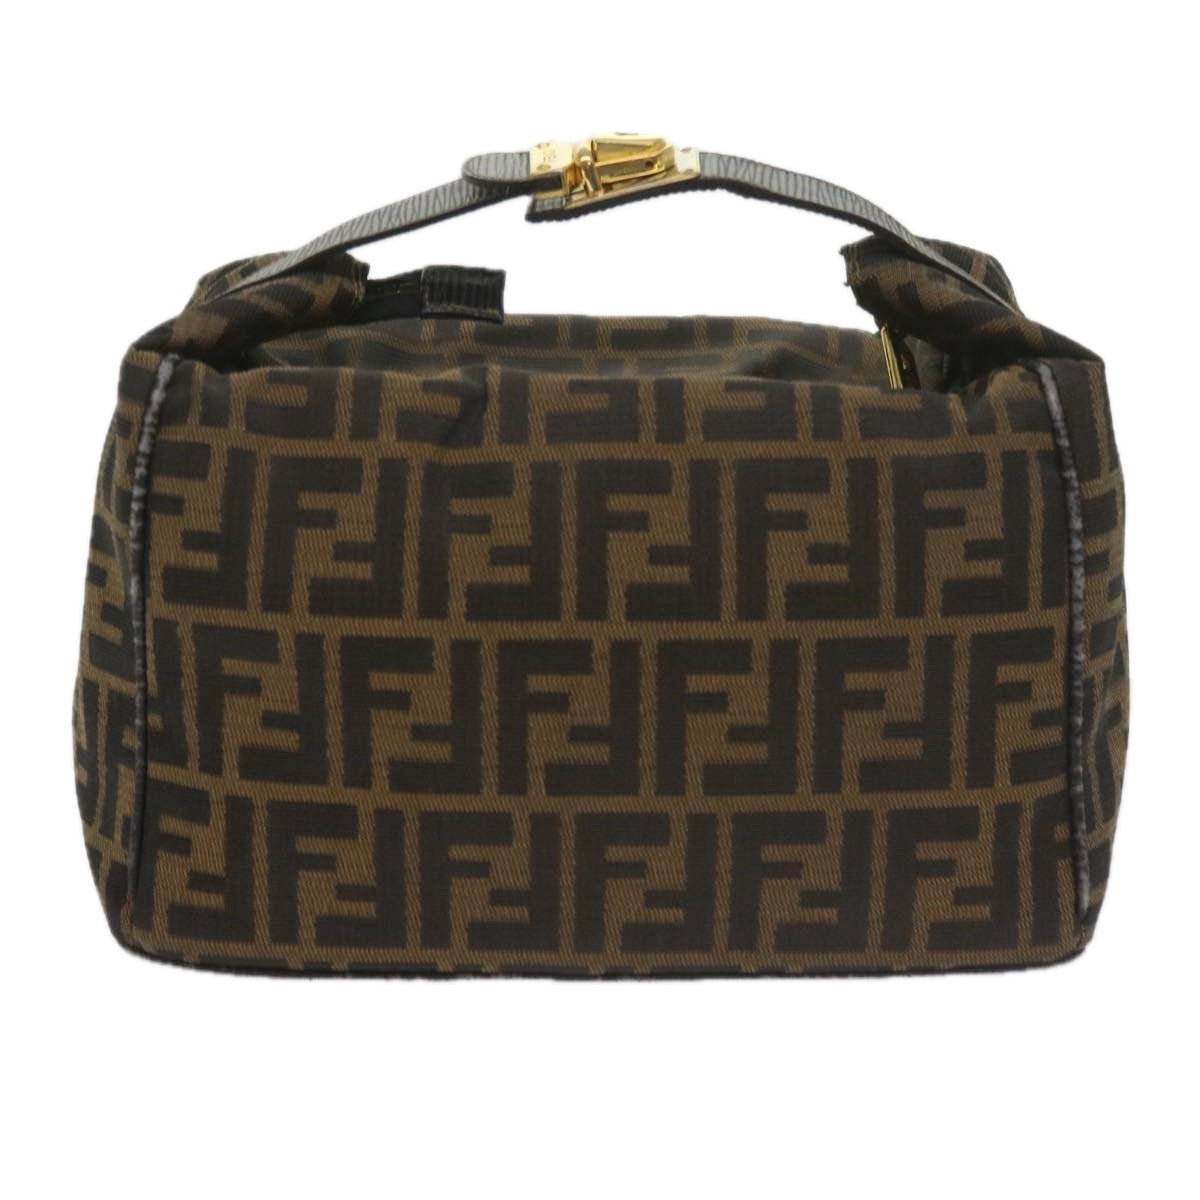 FENDI Zucca Canvas Vanity Cosmetic Pouch Black Brown Auth 60536 - 0